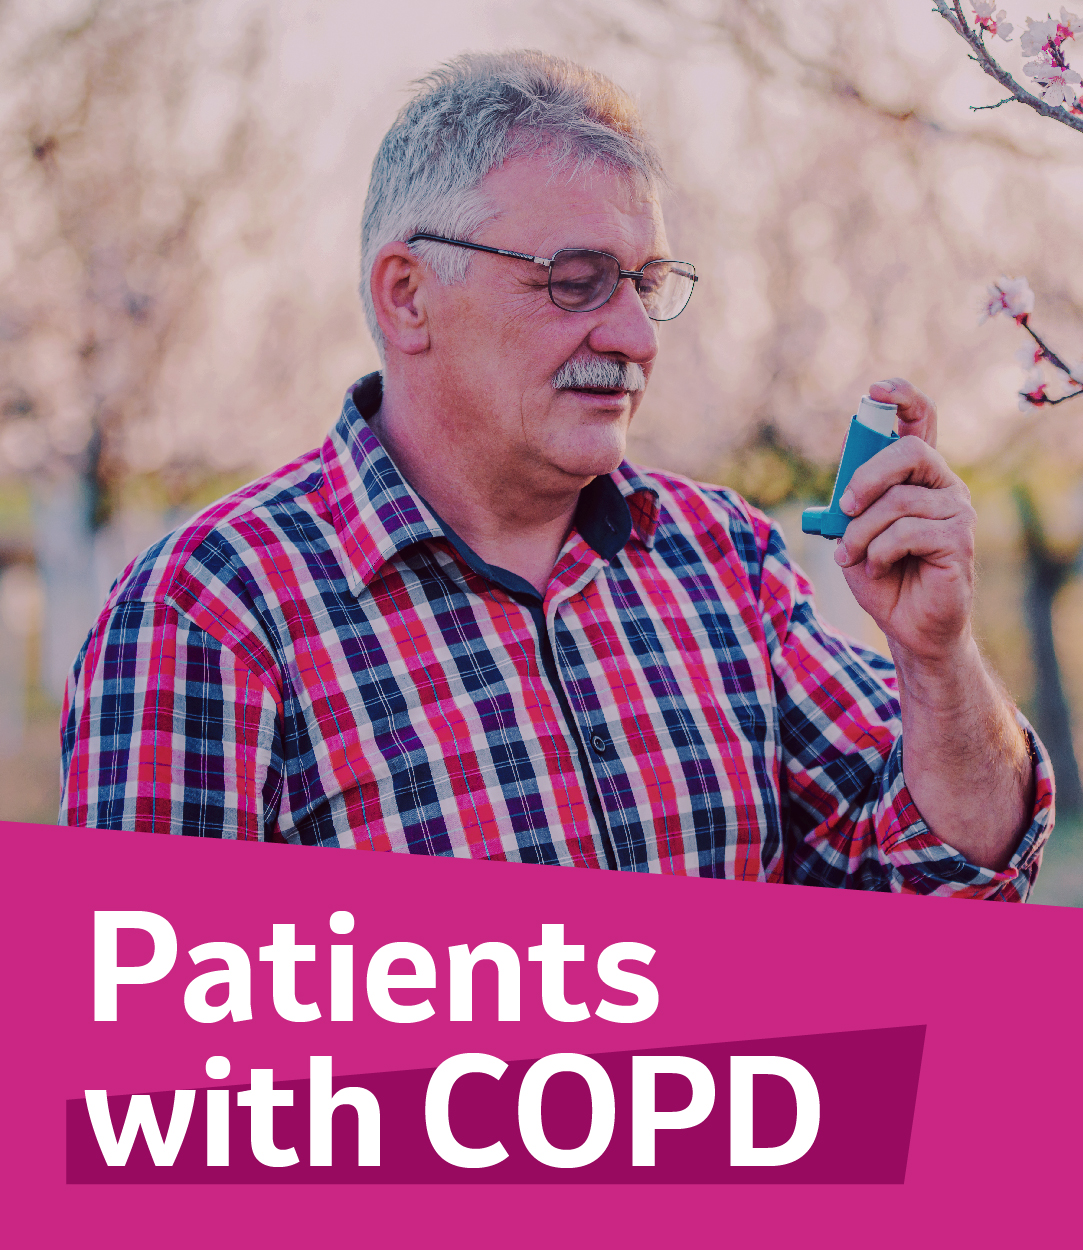 Patients with COPD